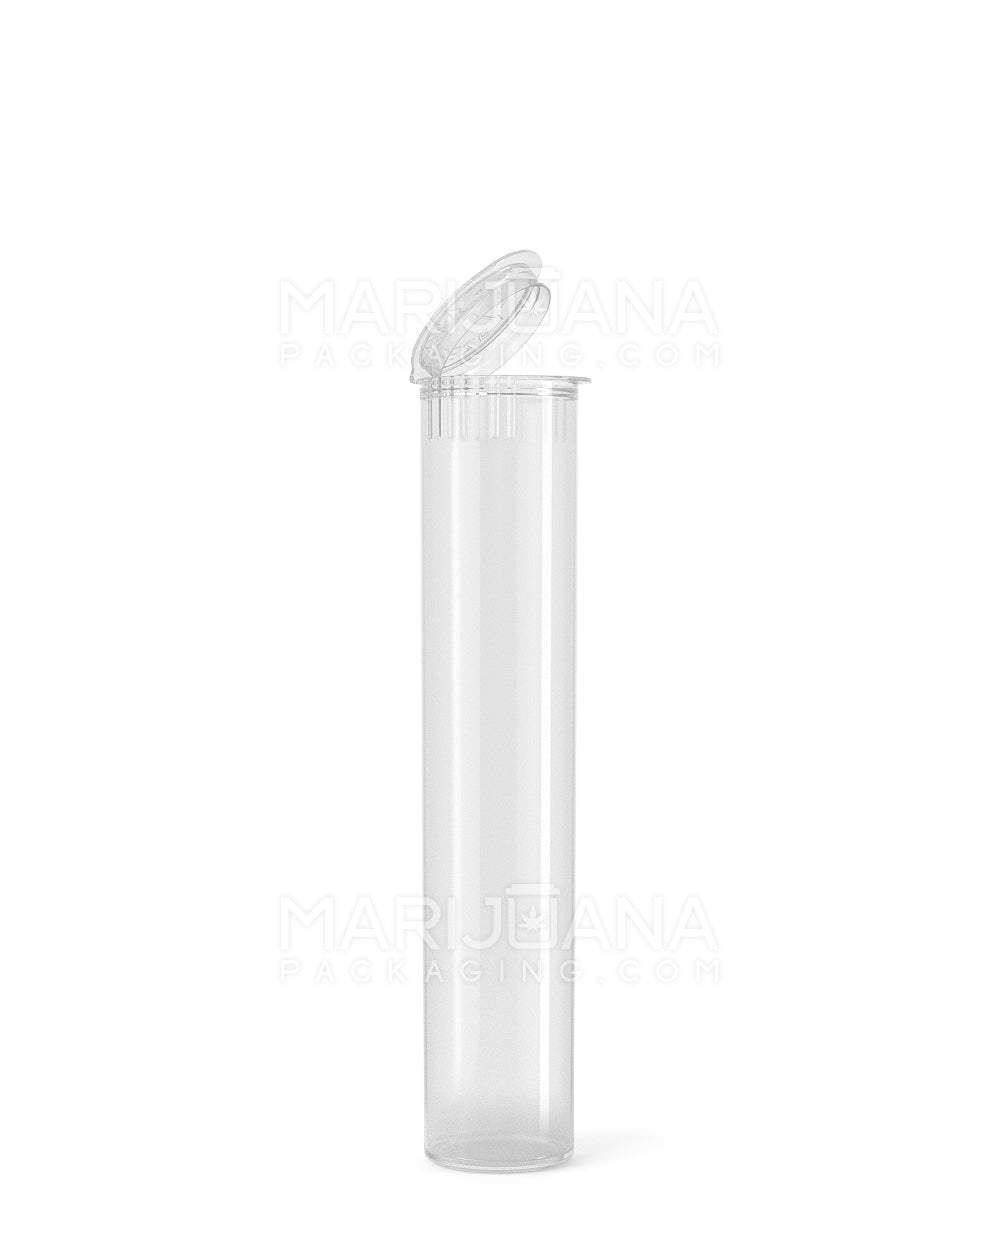 Child Resistant Pop Top Plastic Pre-Roll Tubes | 78mm - Clear | Sample